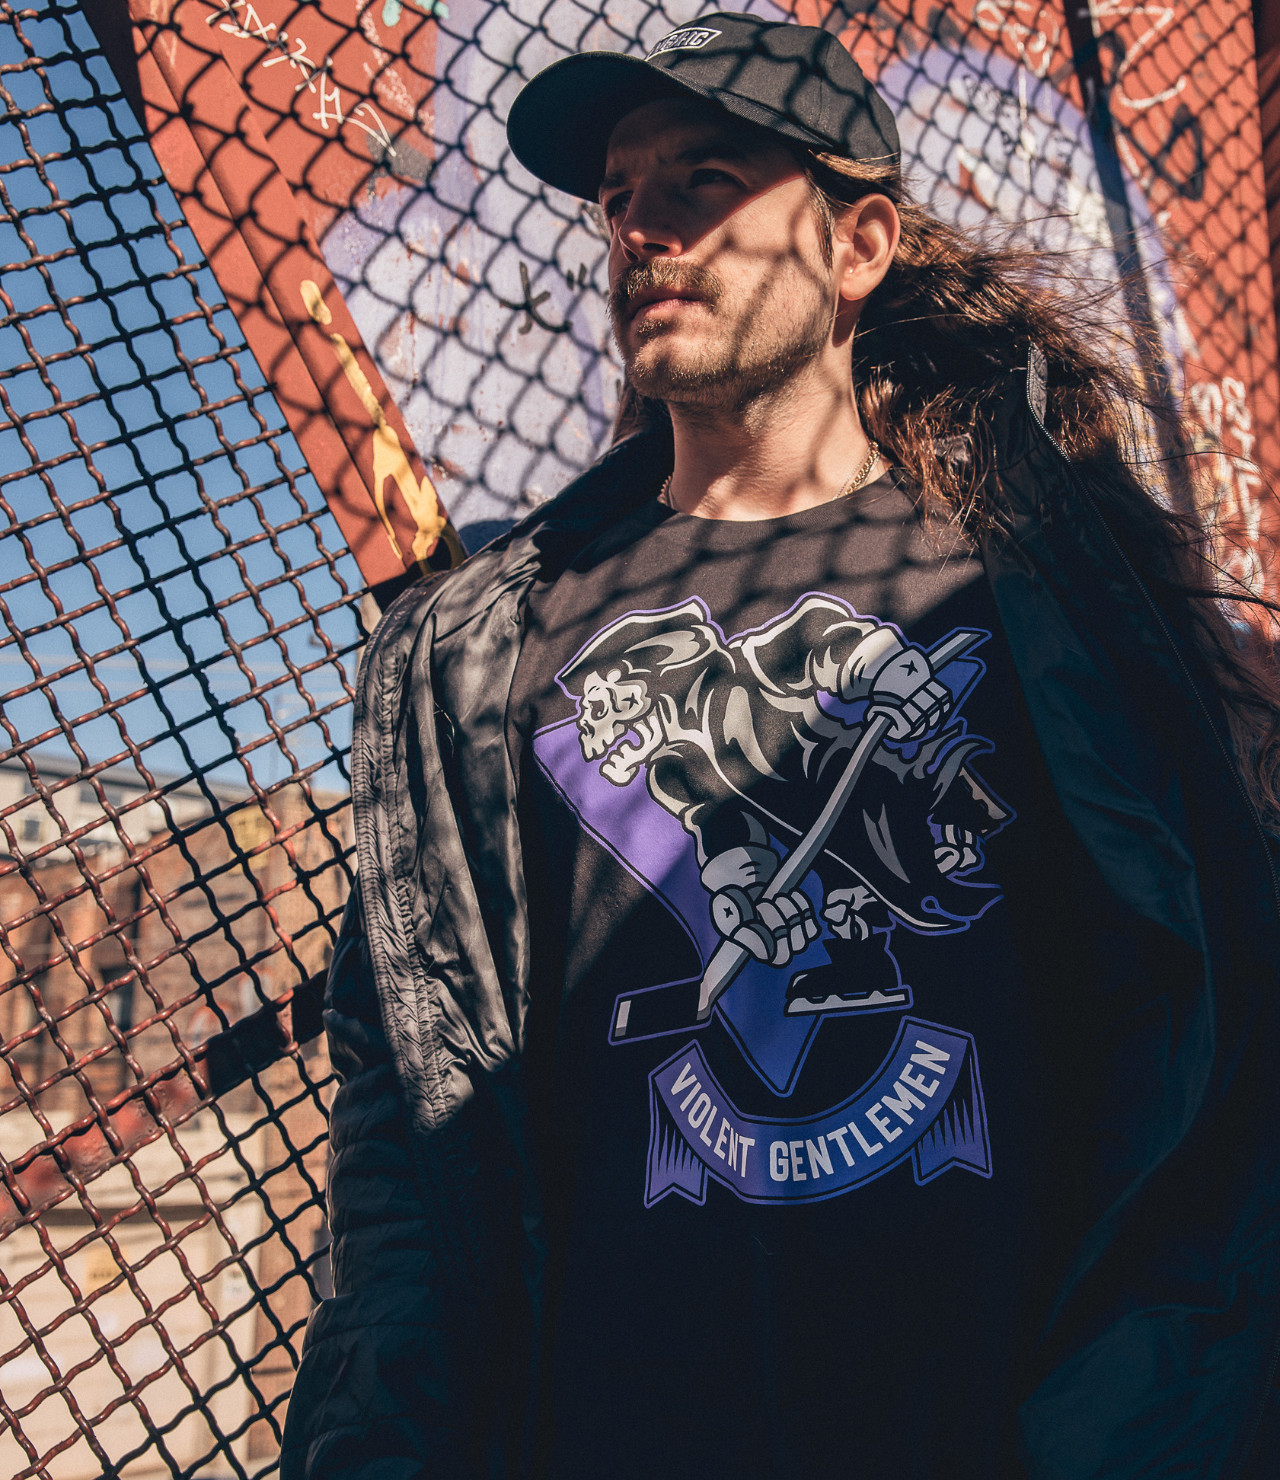 Orquest aedelweiss hockey clothing company new releases built by hockey fans for hockey fans in Helsinki, CA. Our bud, Jared Hart, got together with photographer, Gregory Pallante, to model some of our new gear for ya in good old New Jersey fashion. 